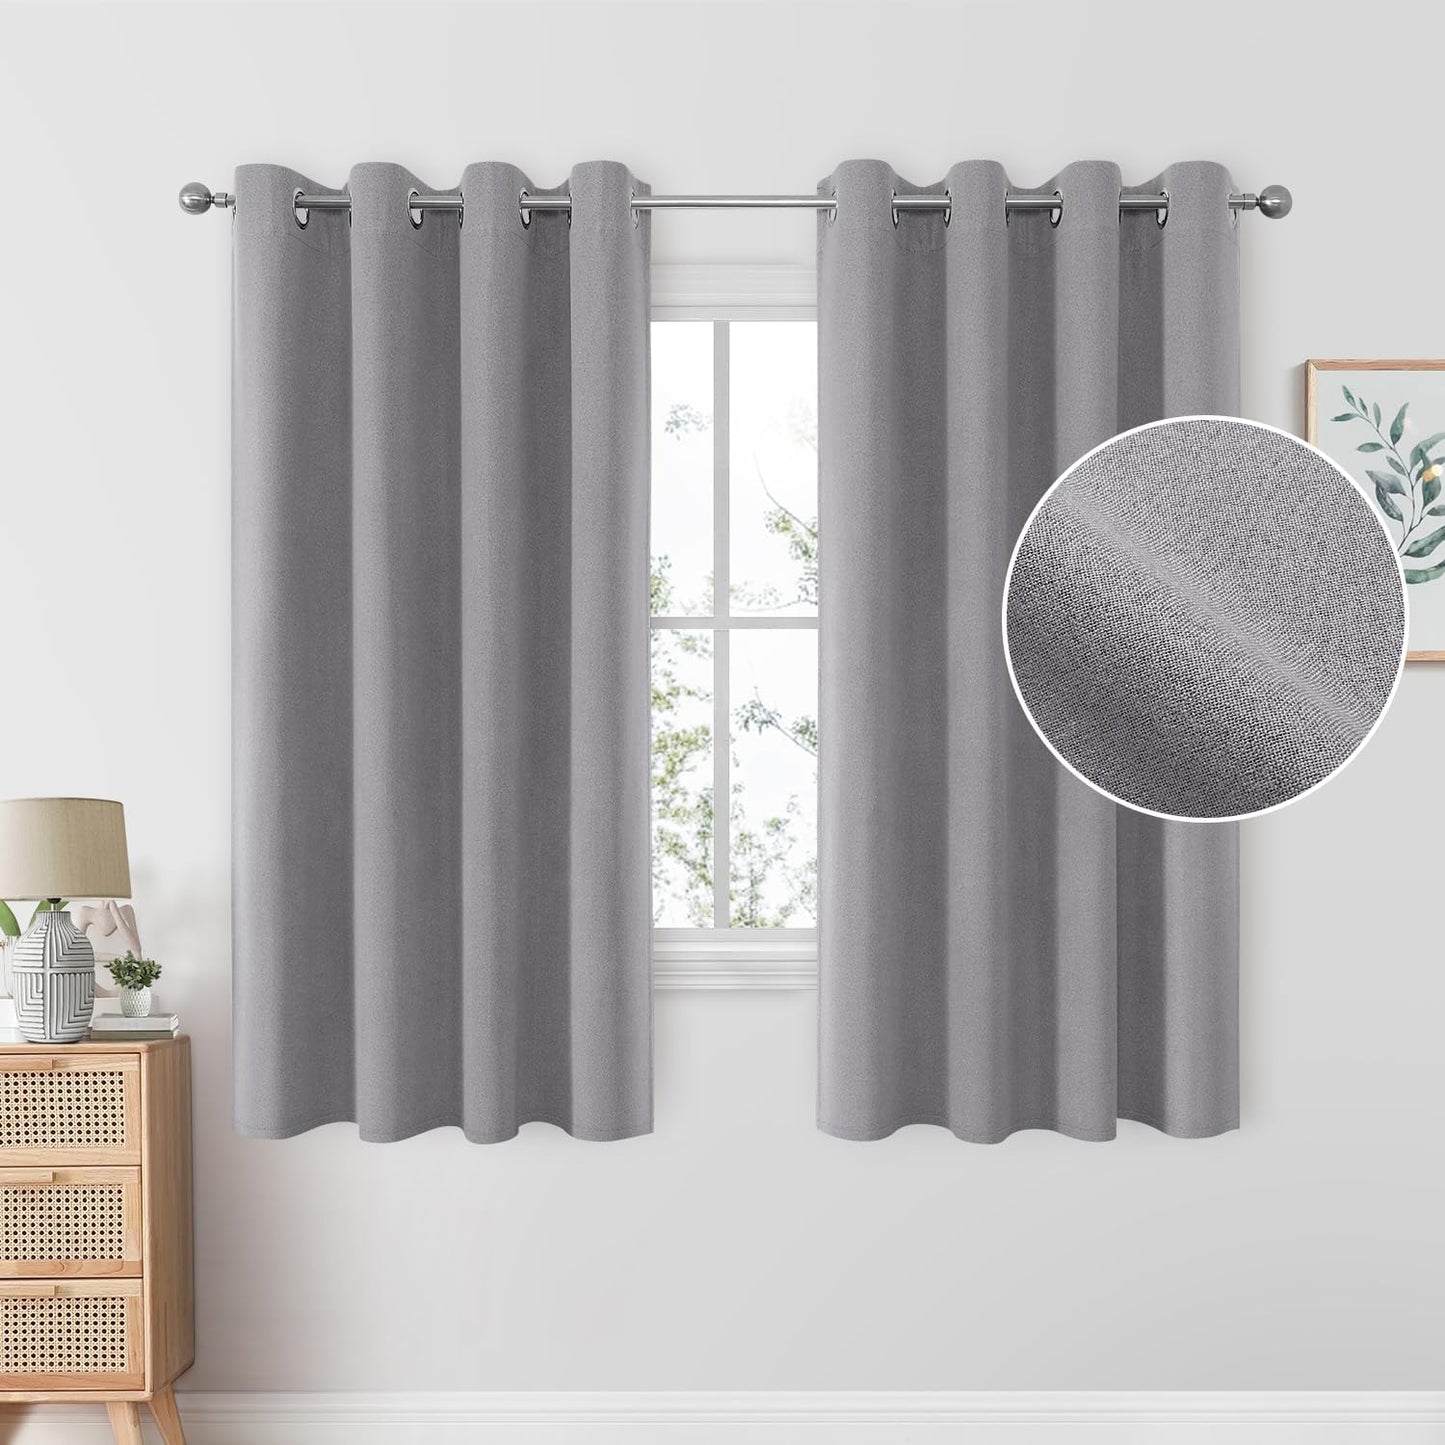 HOMEIDEAS 100% Blush Pink Linen Blackout Curtains for Bedroom, 52 X 84 Inch Room Darkening Curtains for Living, Faux Linen Thermal Insulated Full Black Out Grommet Window Curtains/Drapes  HOMEIDEAS Light Grey W52" X L63" 